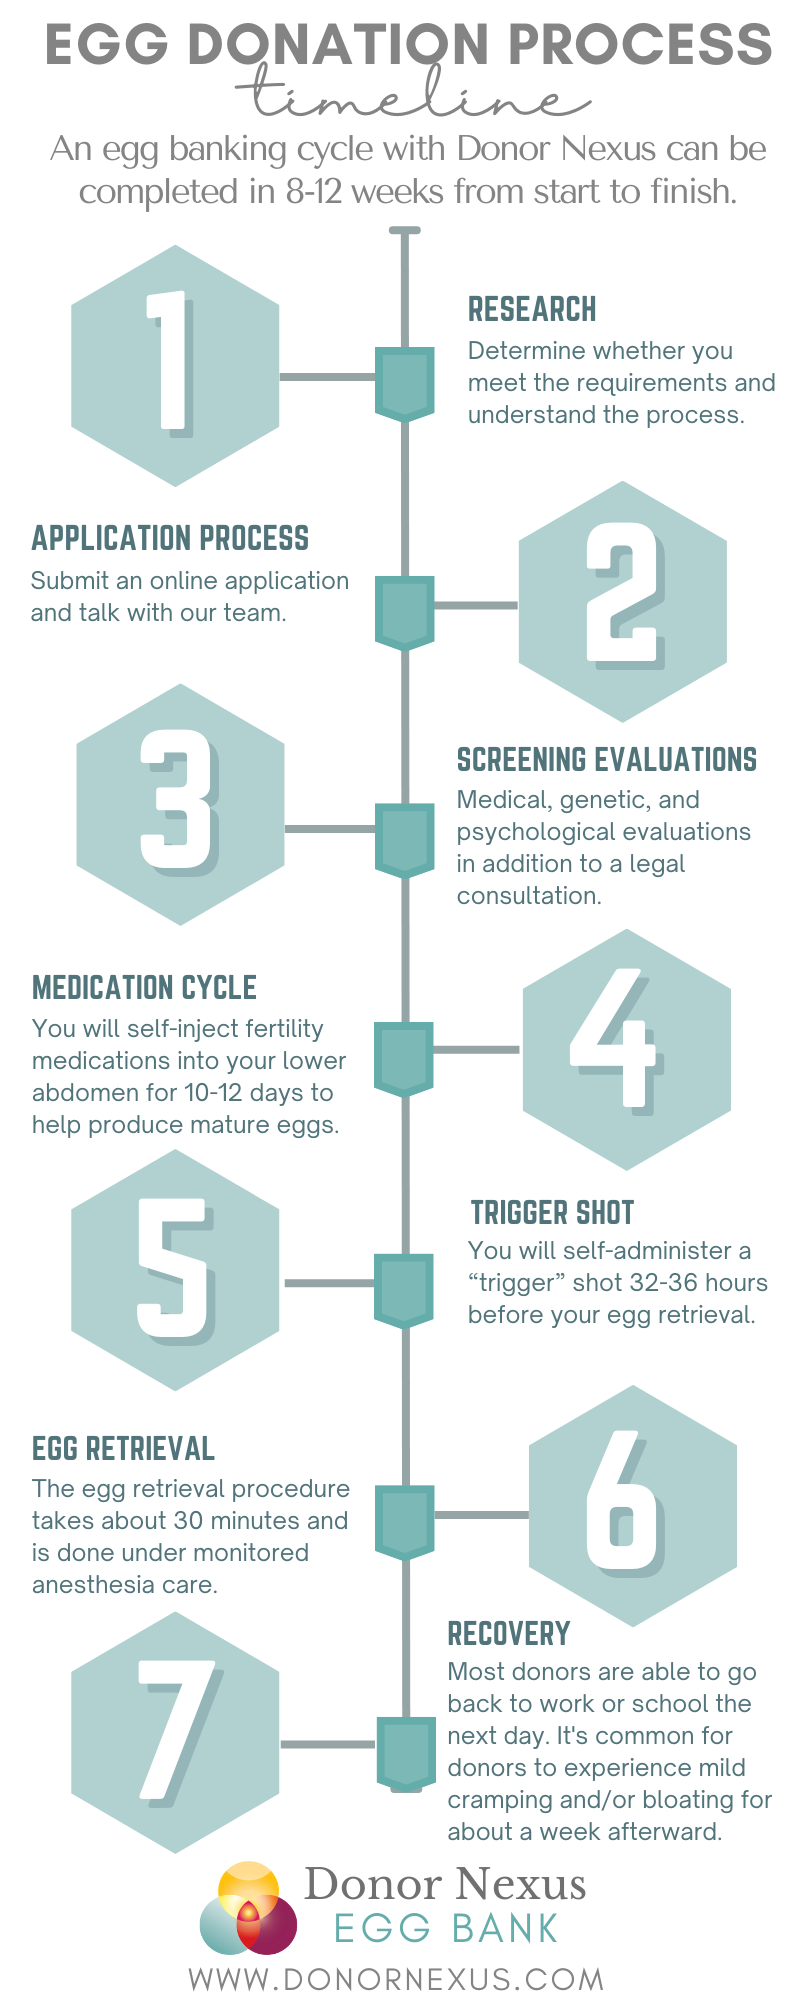 Egg Donation Process Timeline: Egg Donation takes 8-12 weeks with the Donor Nexus Egg Bank. Learn more!